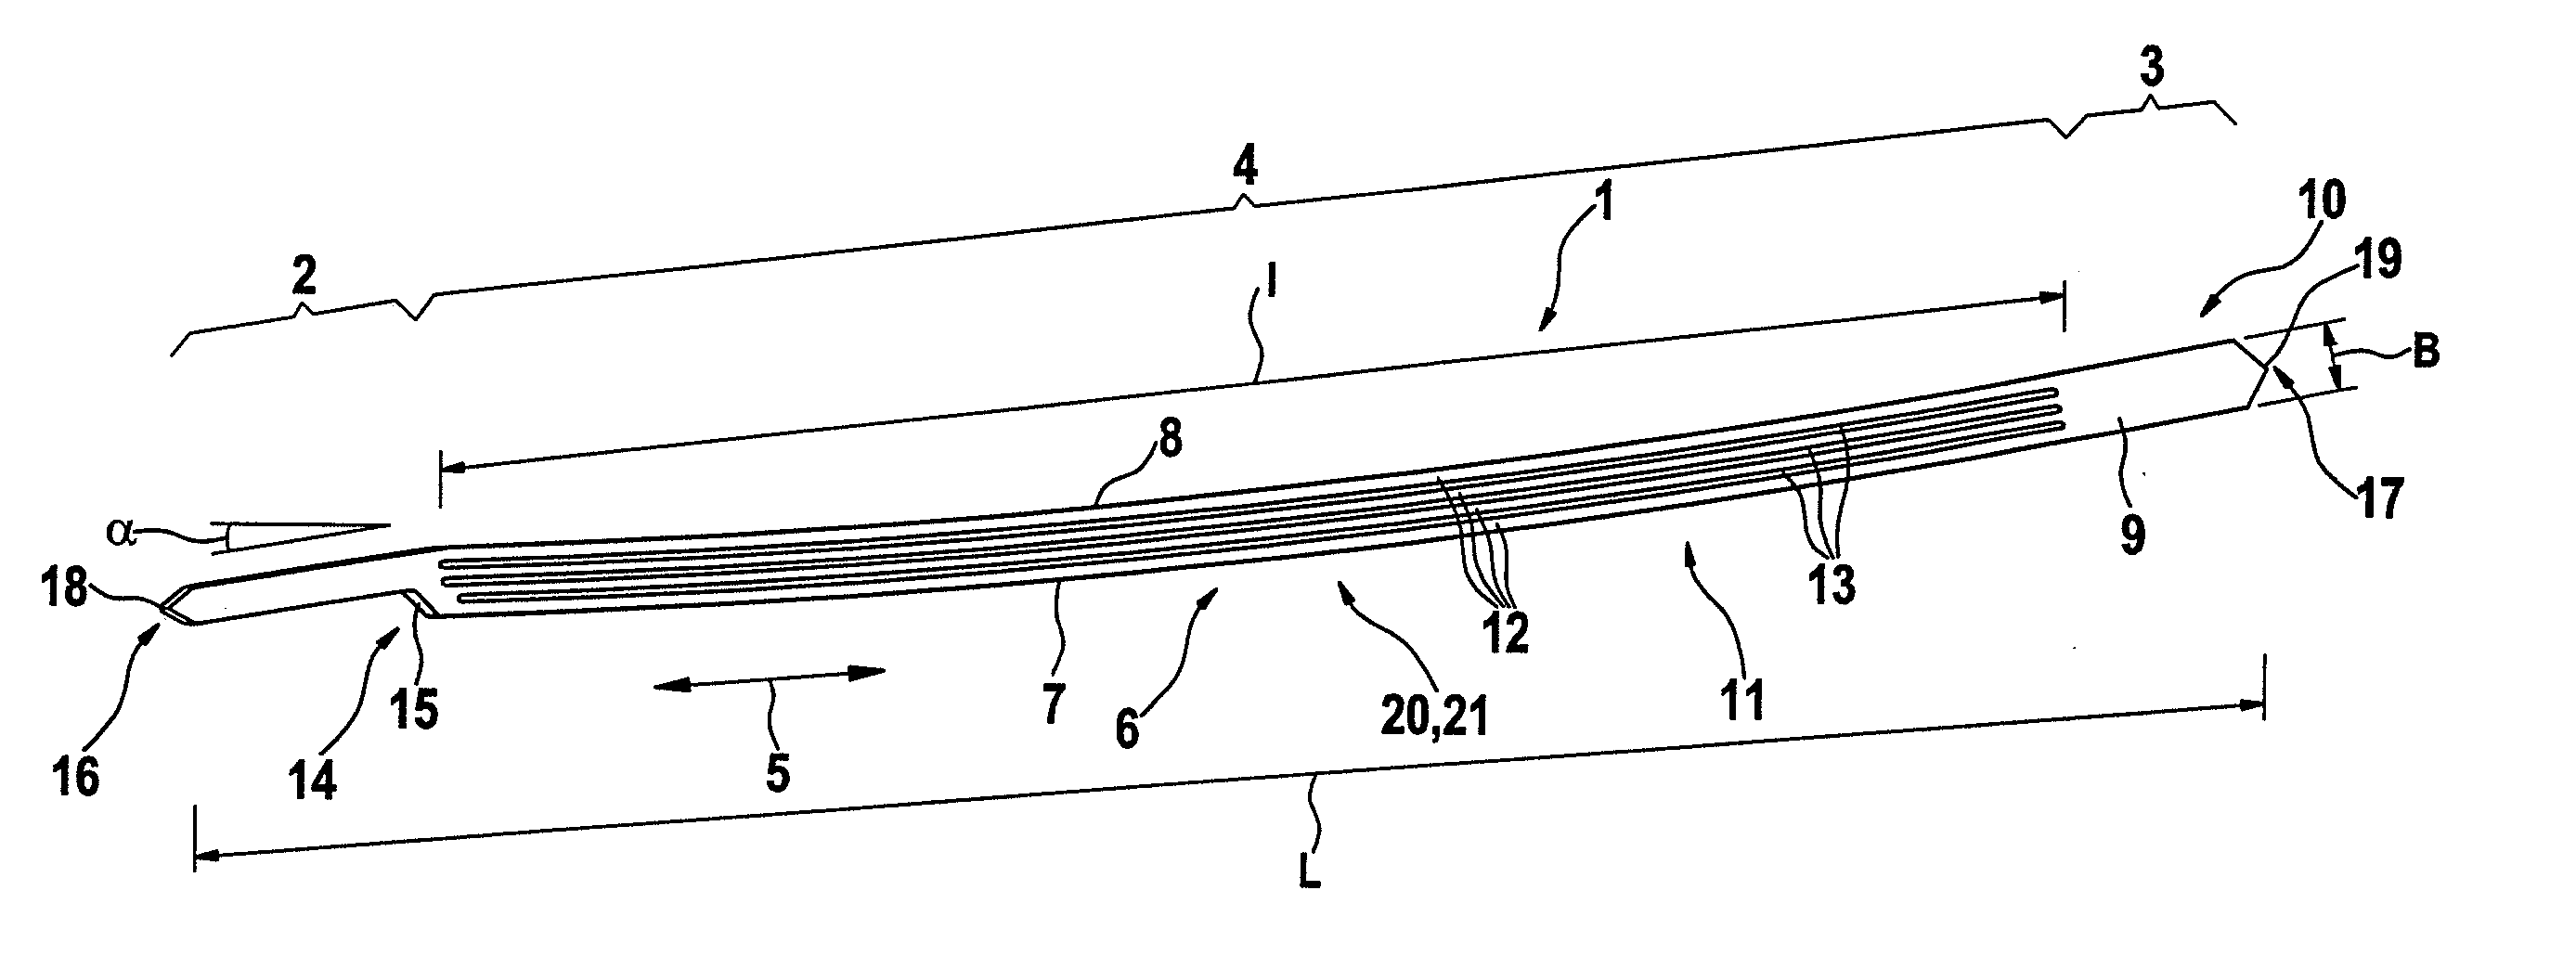 Electrical contact element for contacting an electrical test sample and contacting apparatus